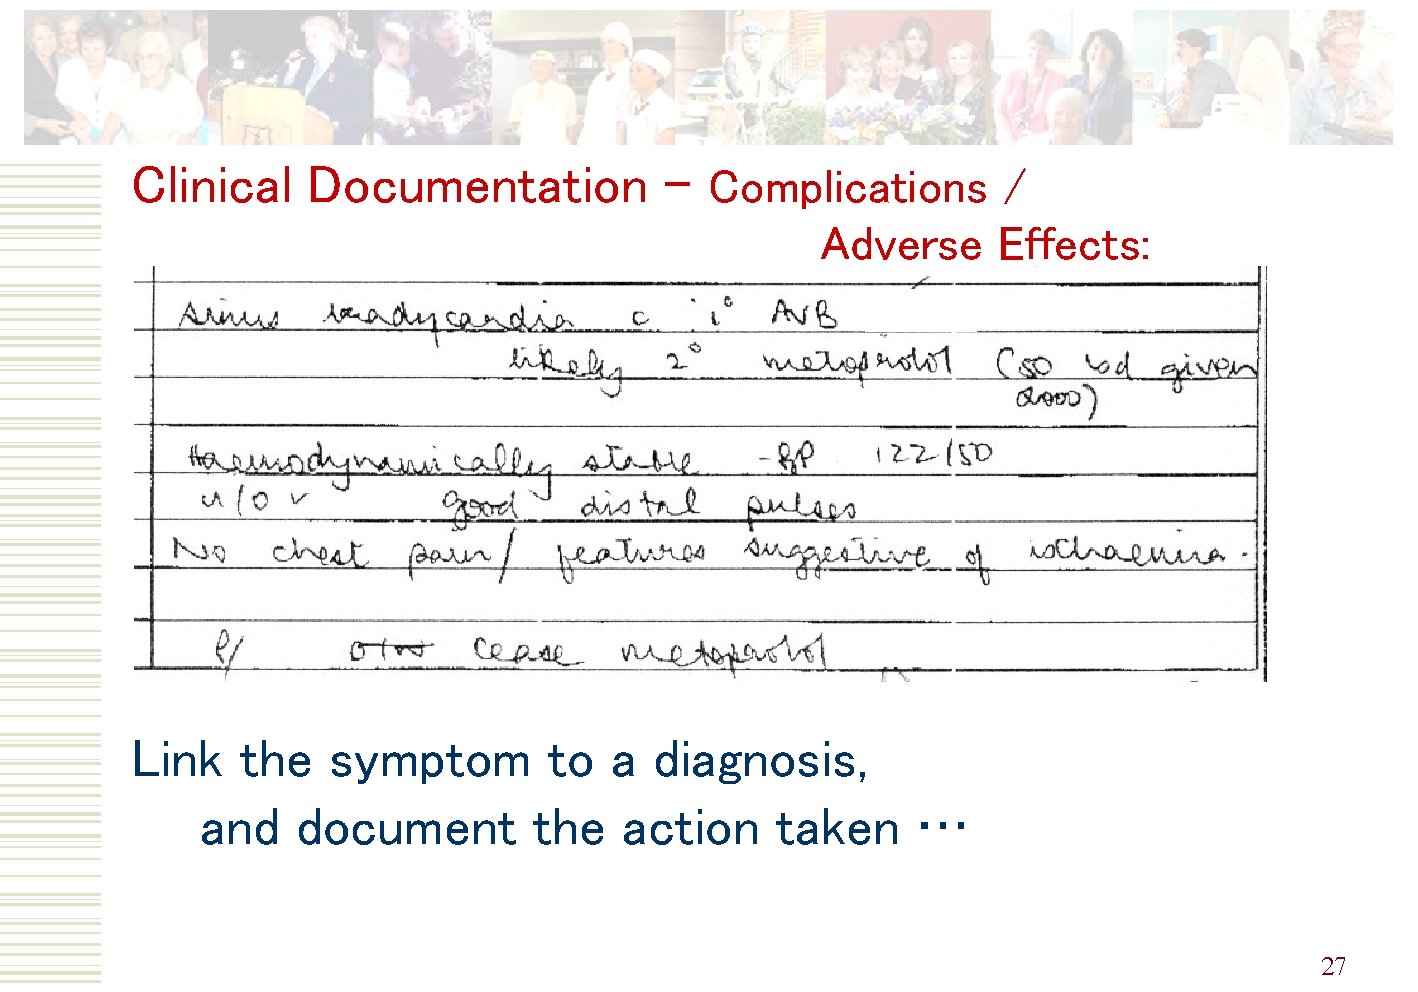 Clinical Documentation – Complications / Adverse Effects: Link the symptom to a diagnosis, and